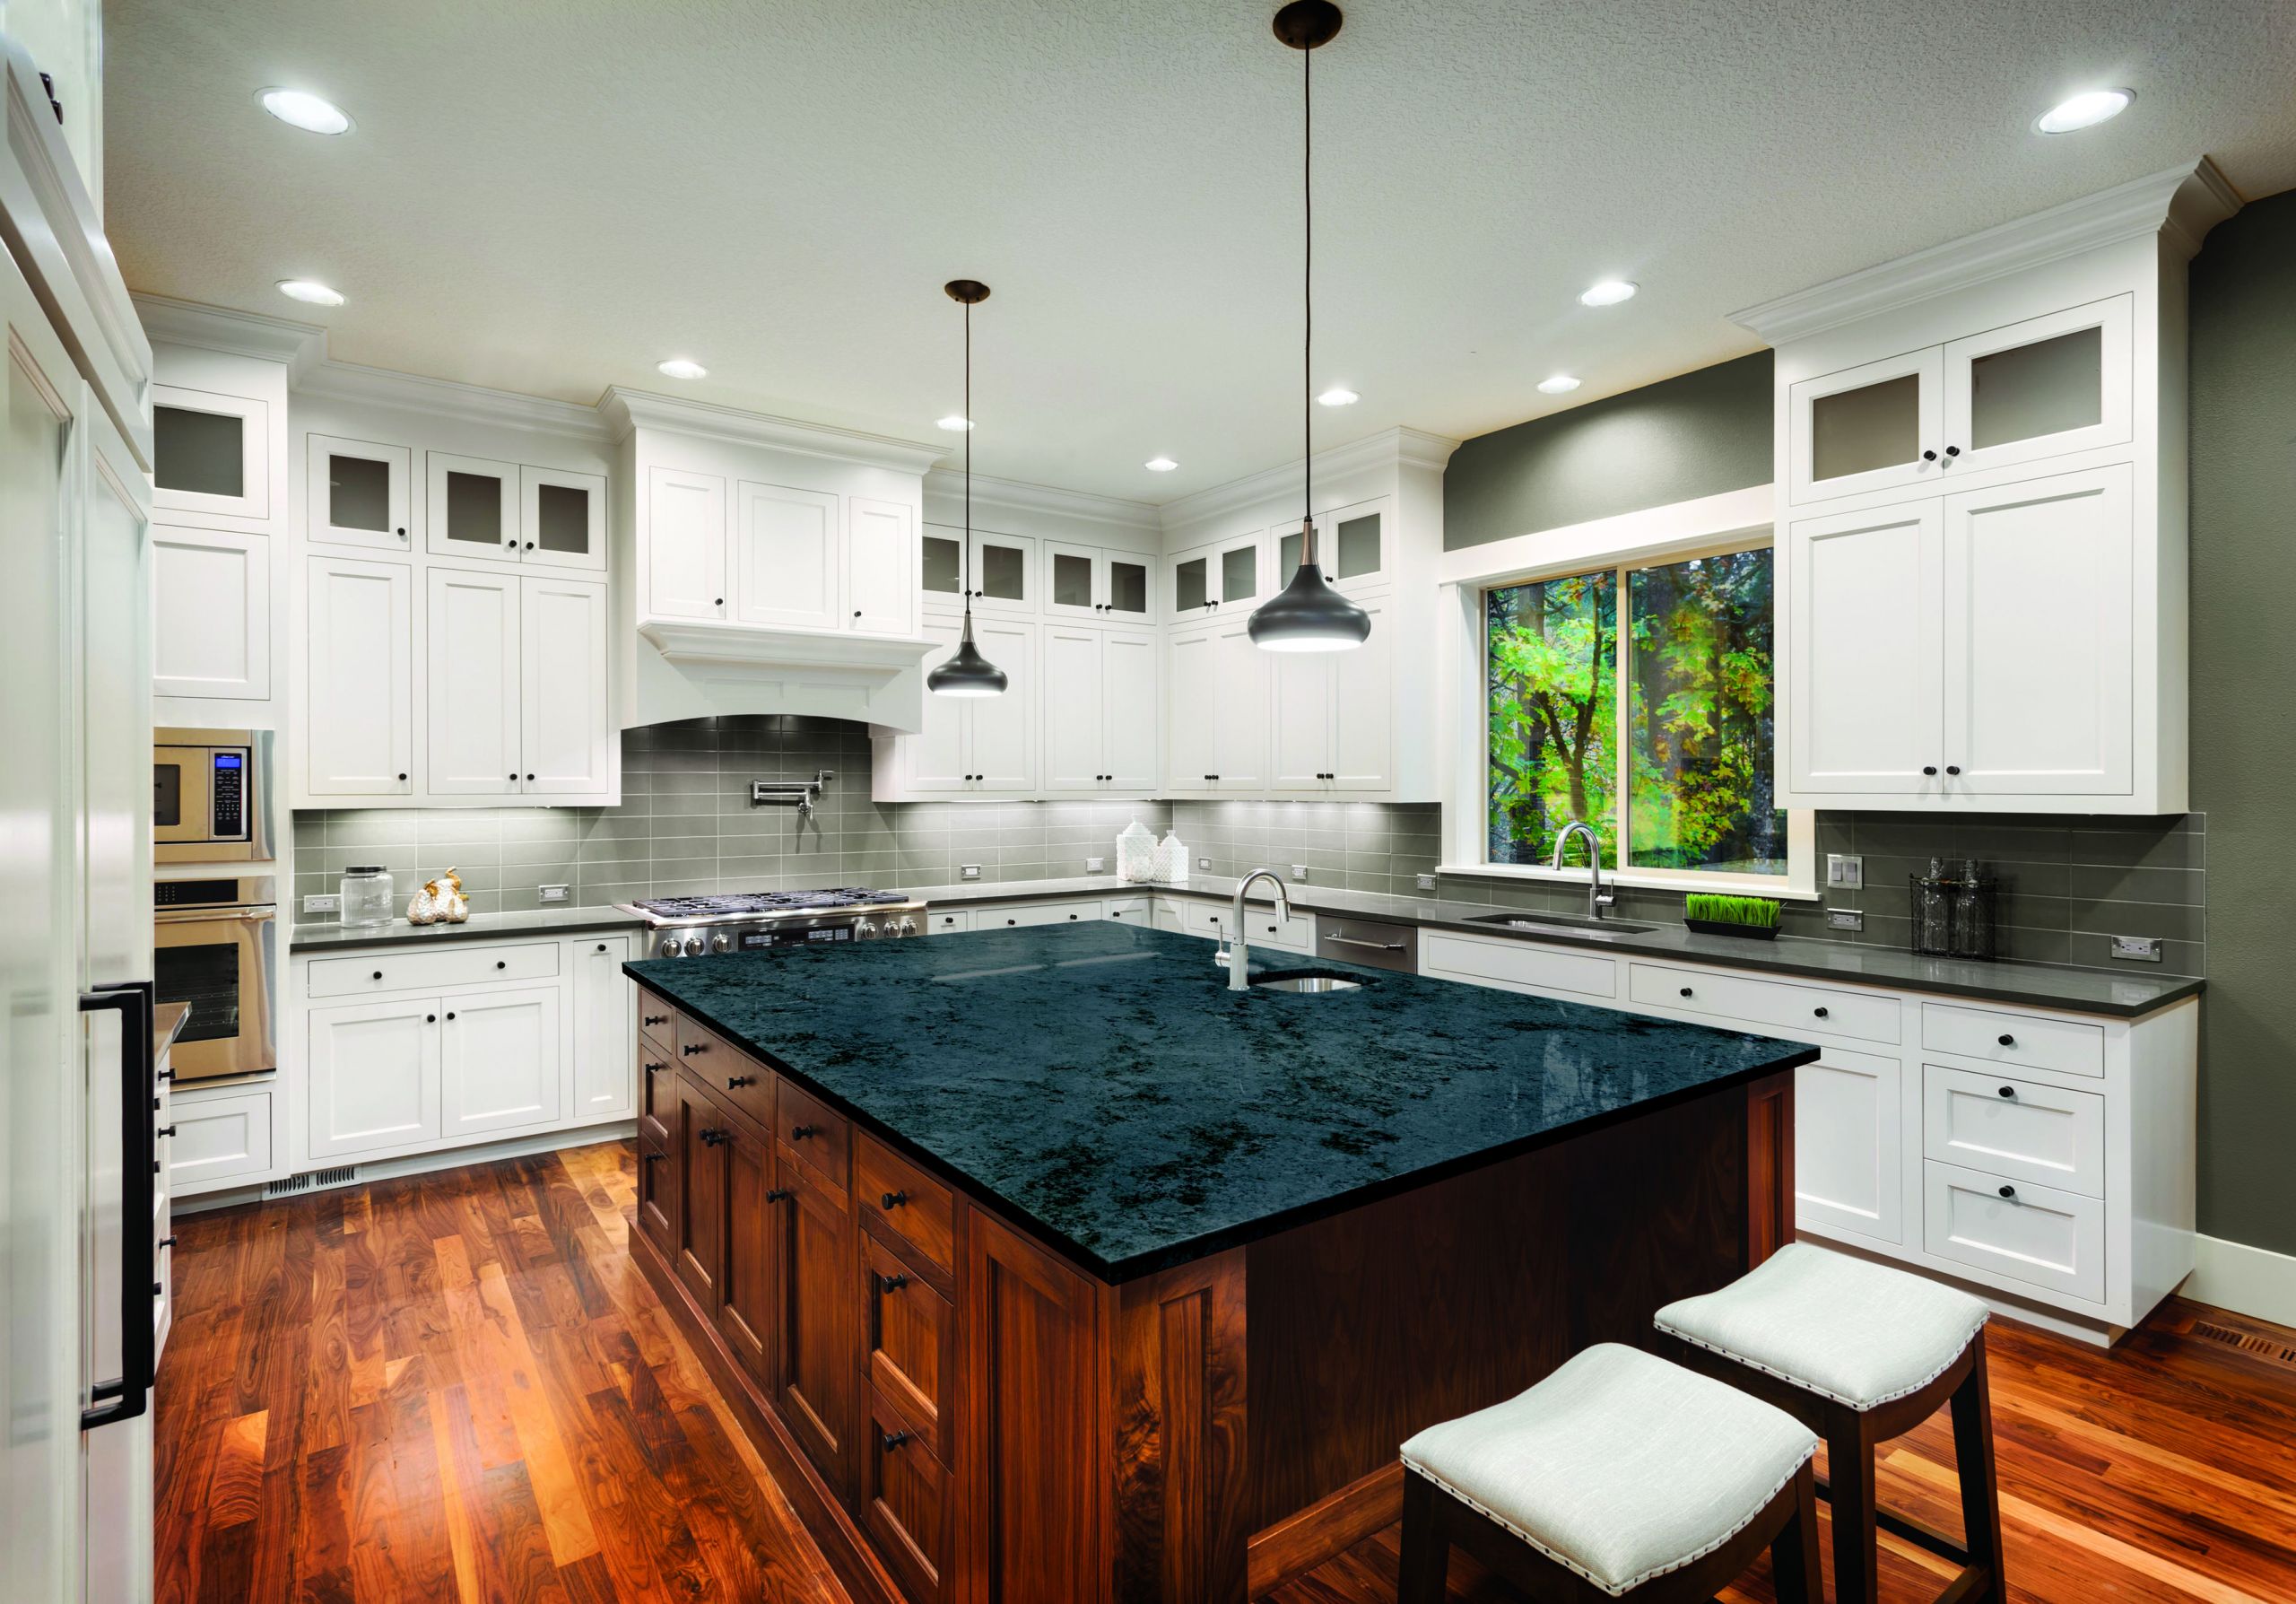 Recessed Lighting In Kitchens
 Recessed Kitchen Lighting Reconsidered